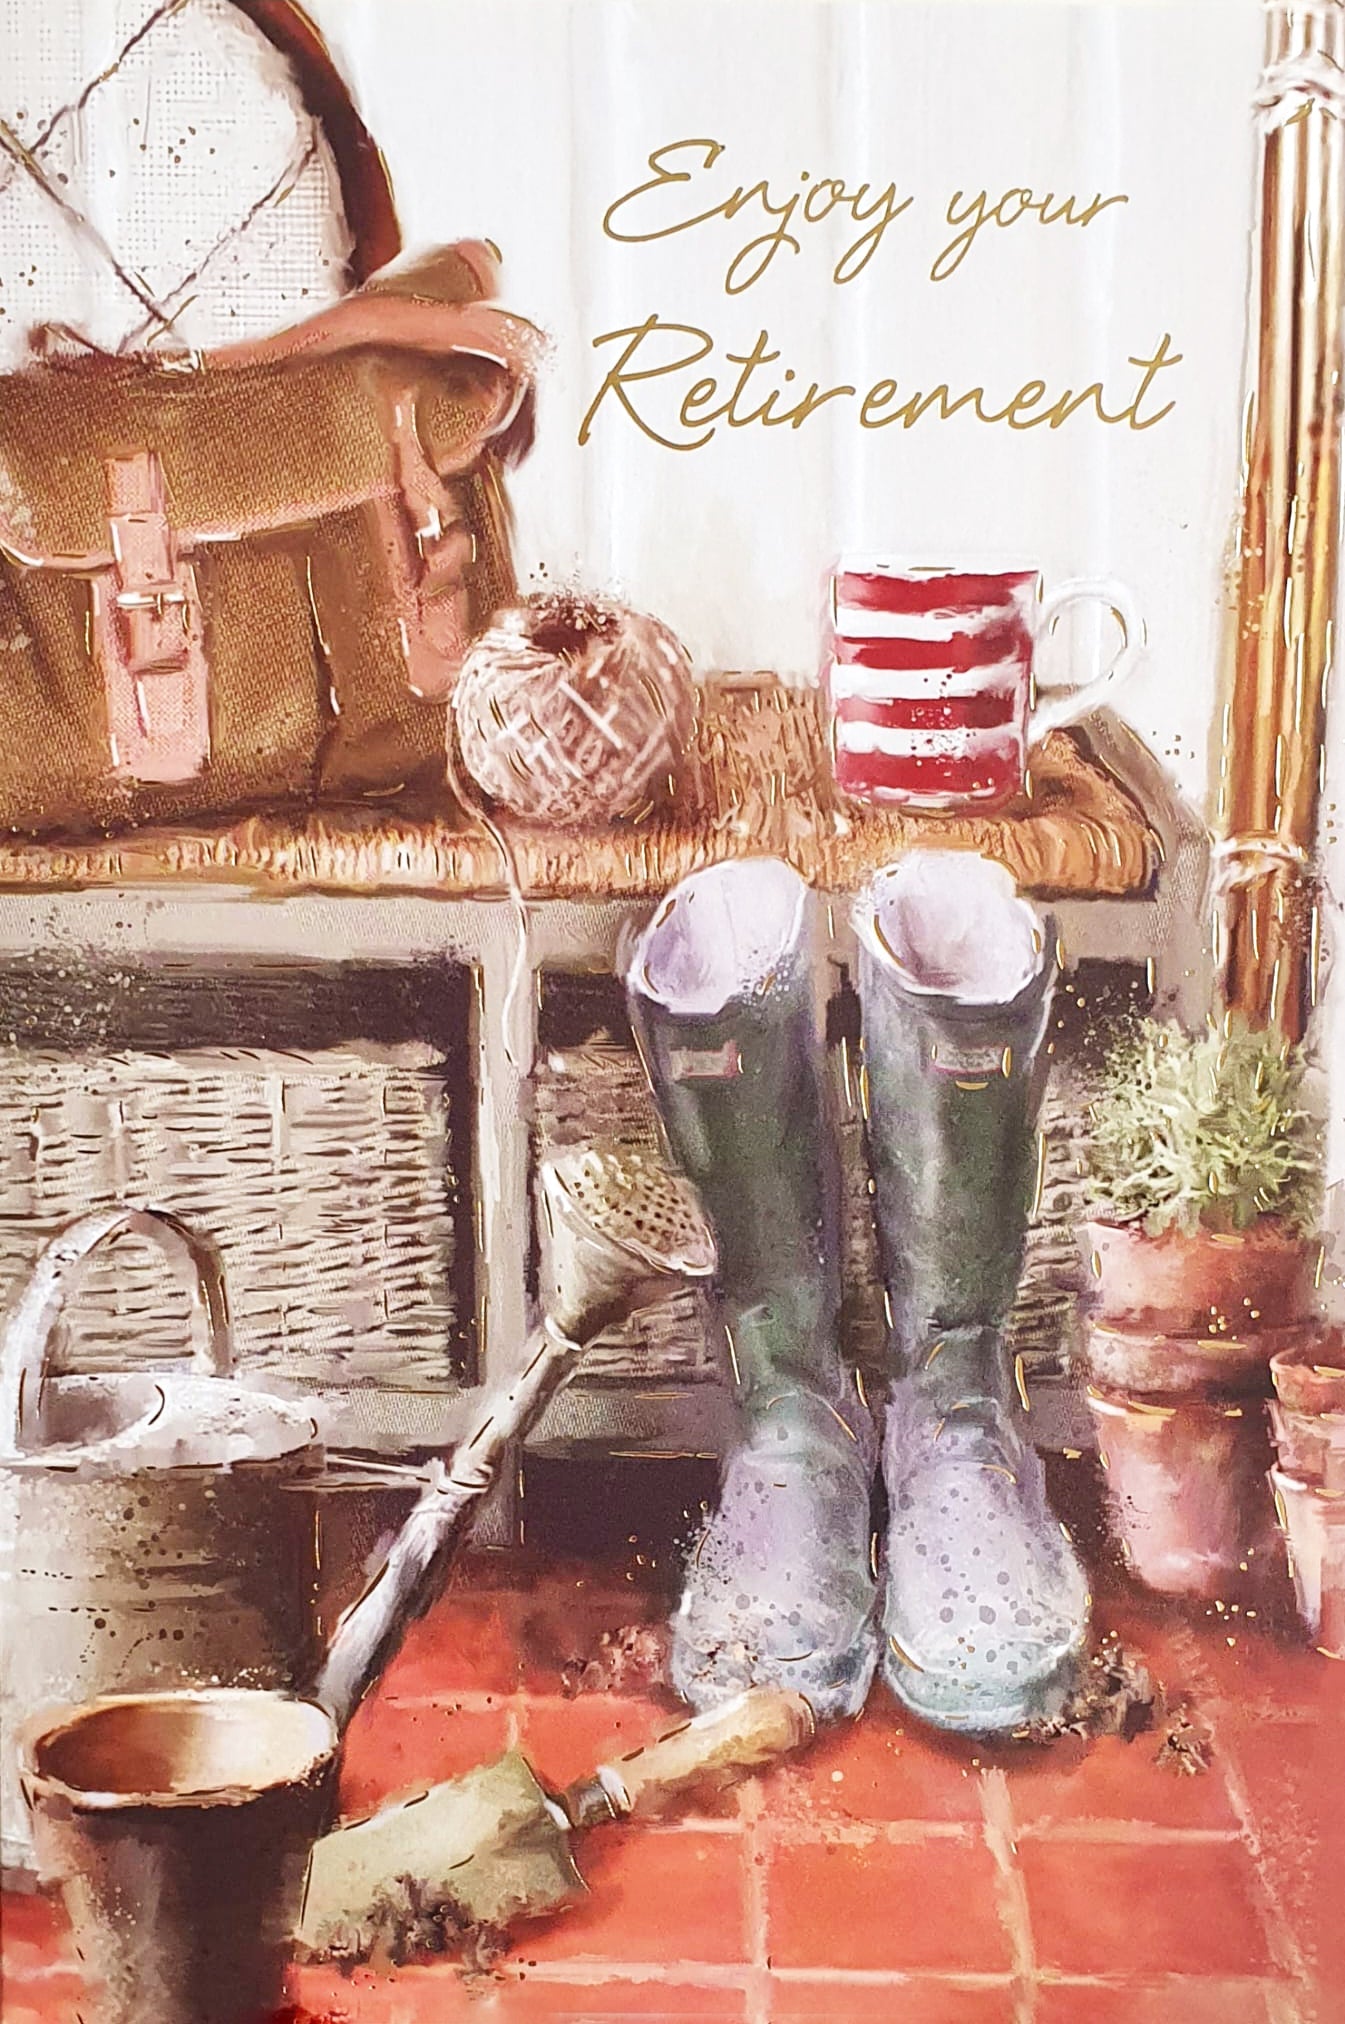 Retirement Card - An Afternoon In The Garden